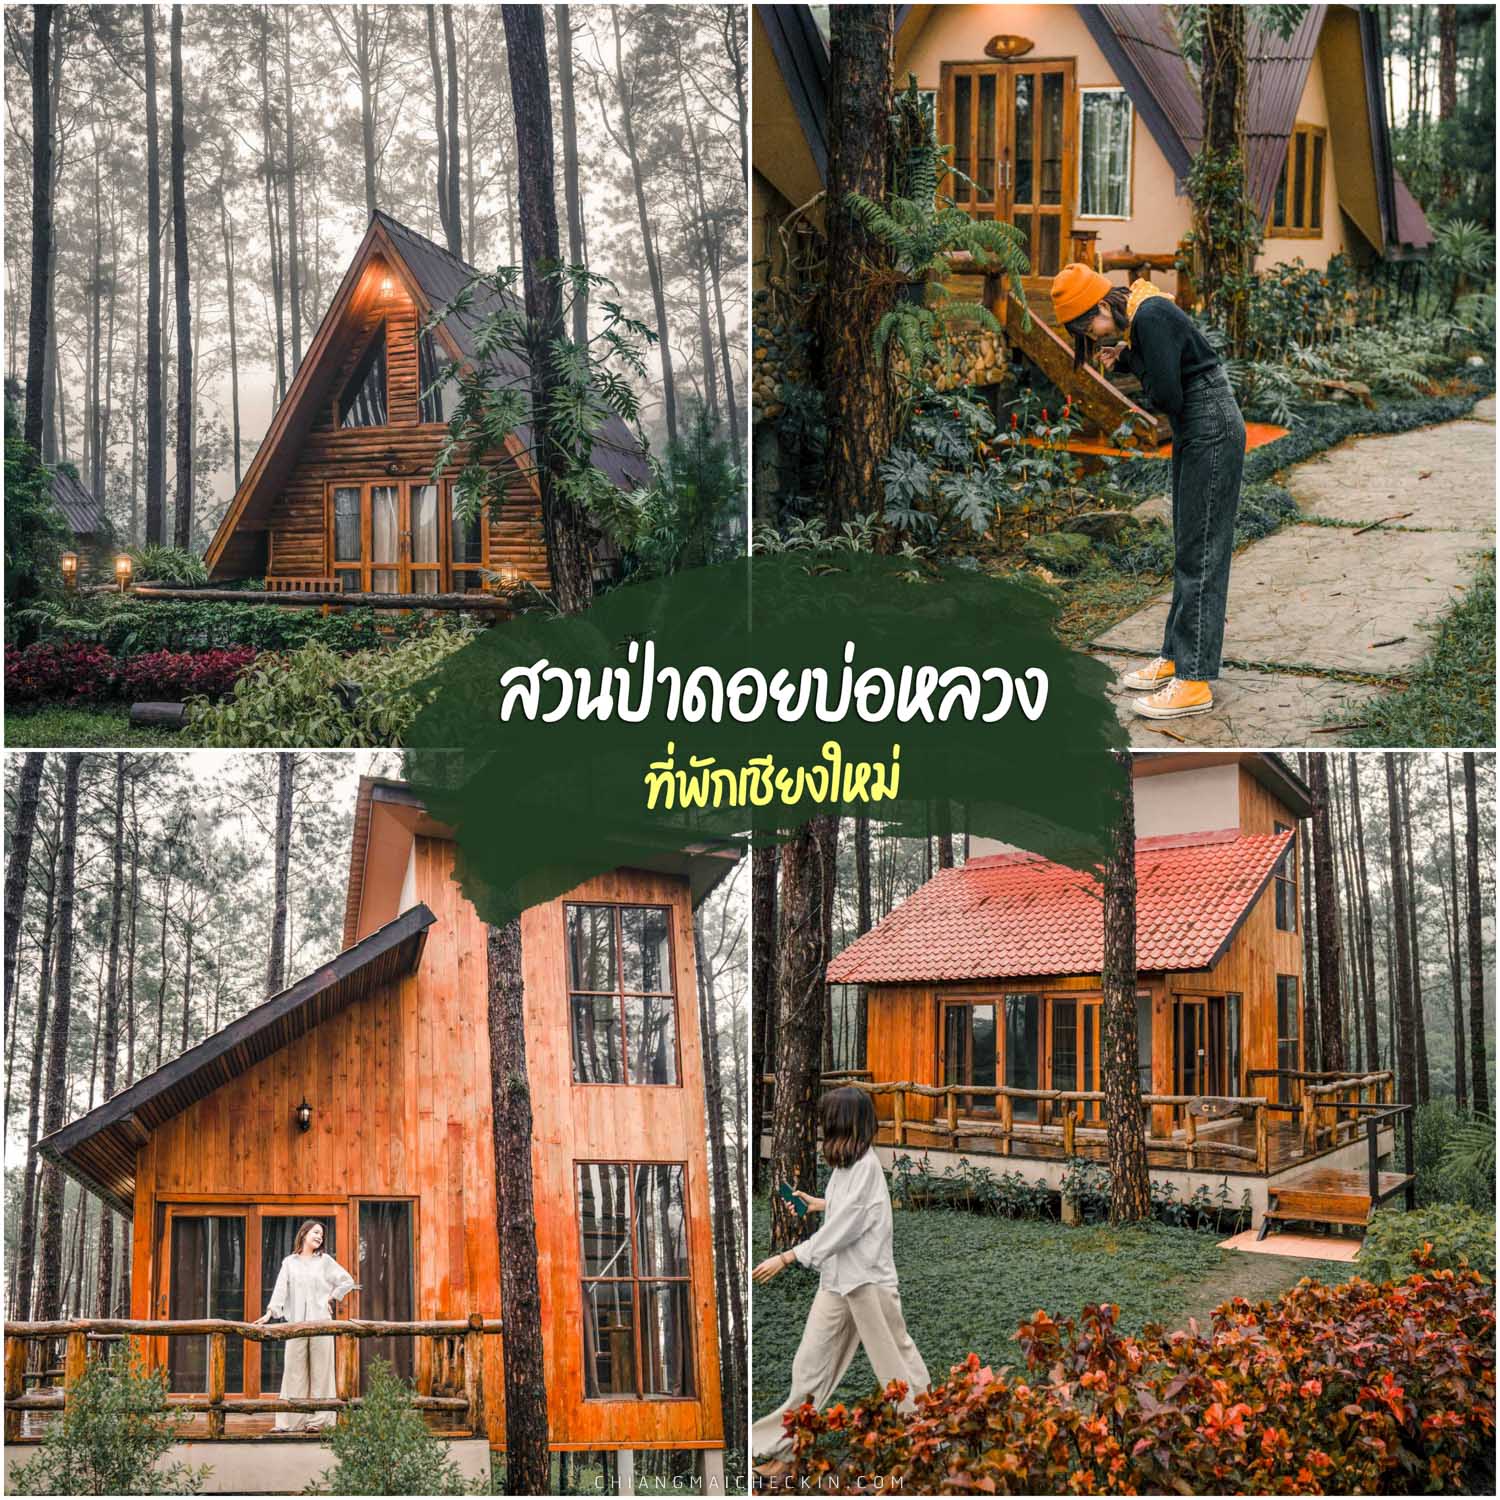 Doi Bo Luang Forest Park, Chiang Mai, the most beautiful accommodation in the middle of a pine forest, extremely natural, the atmosphere is like a house in a story. In the morning there was a lot of fog.